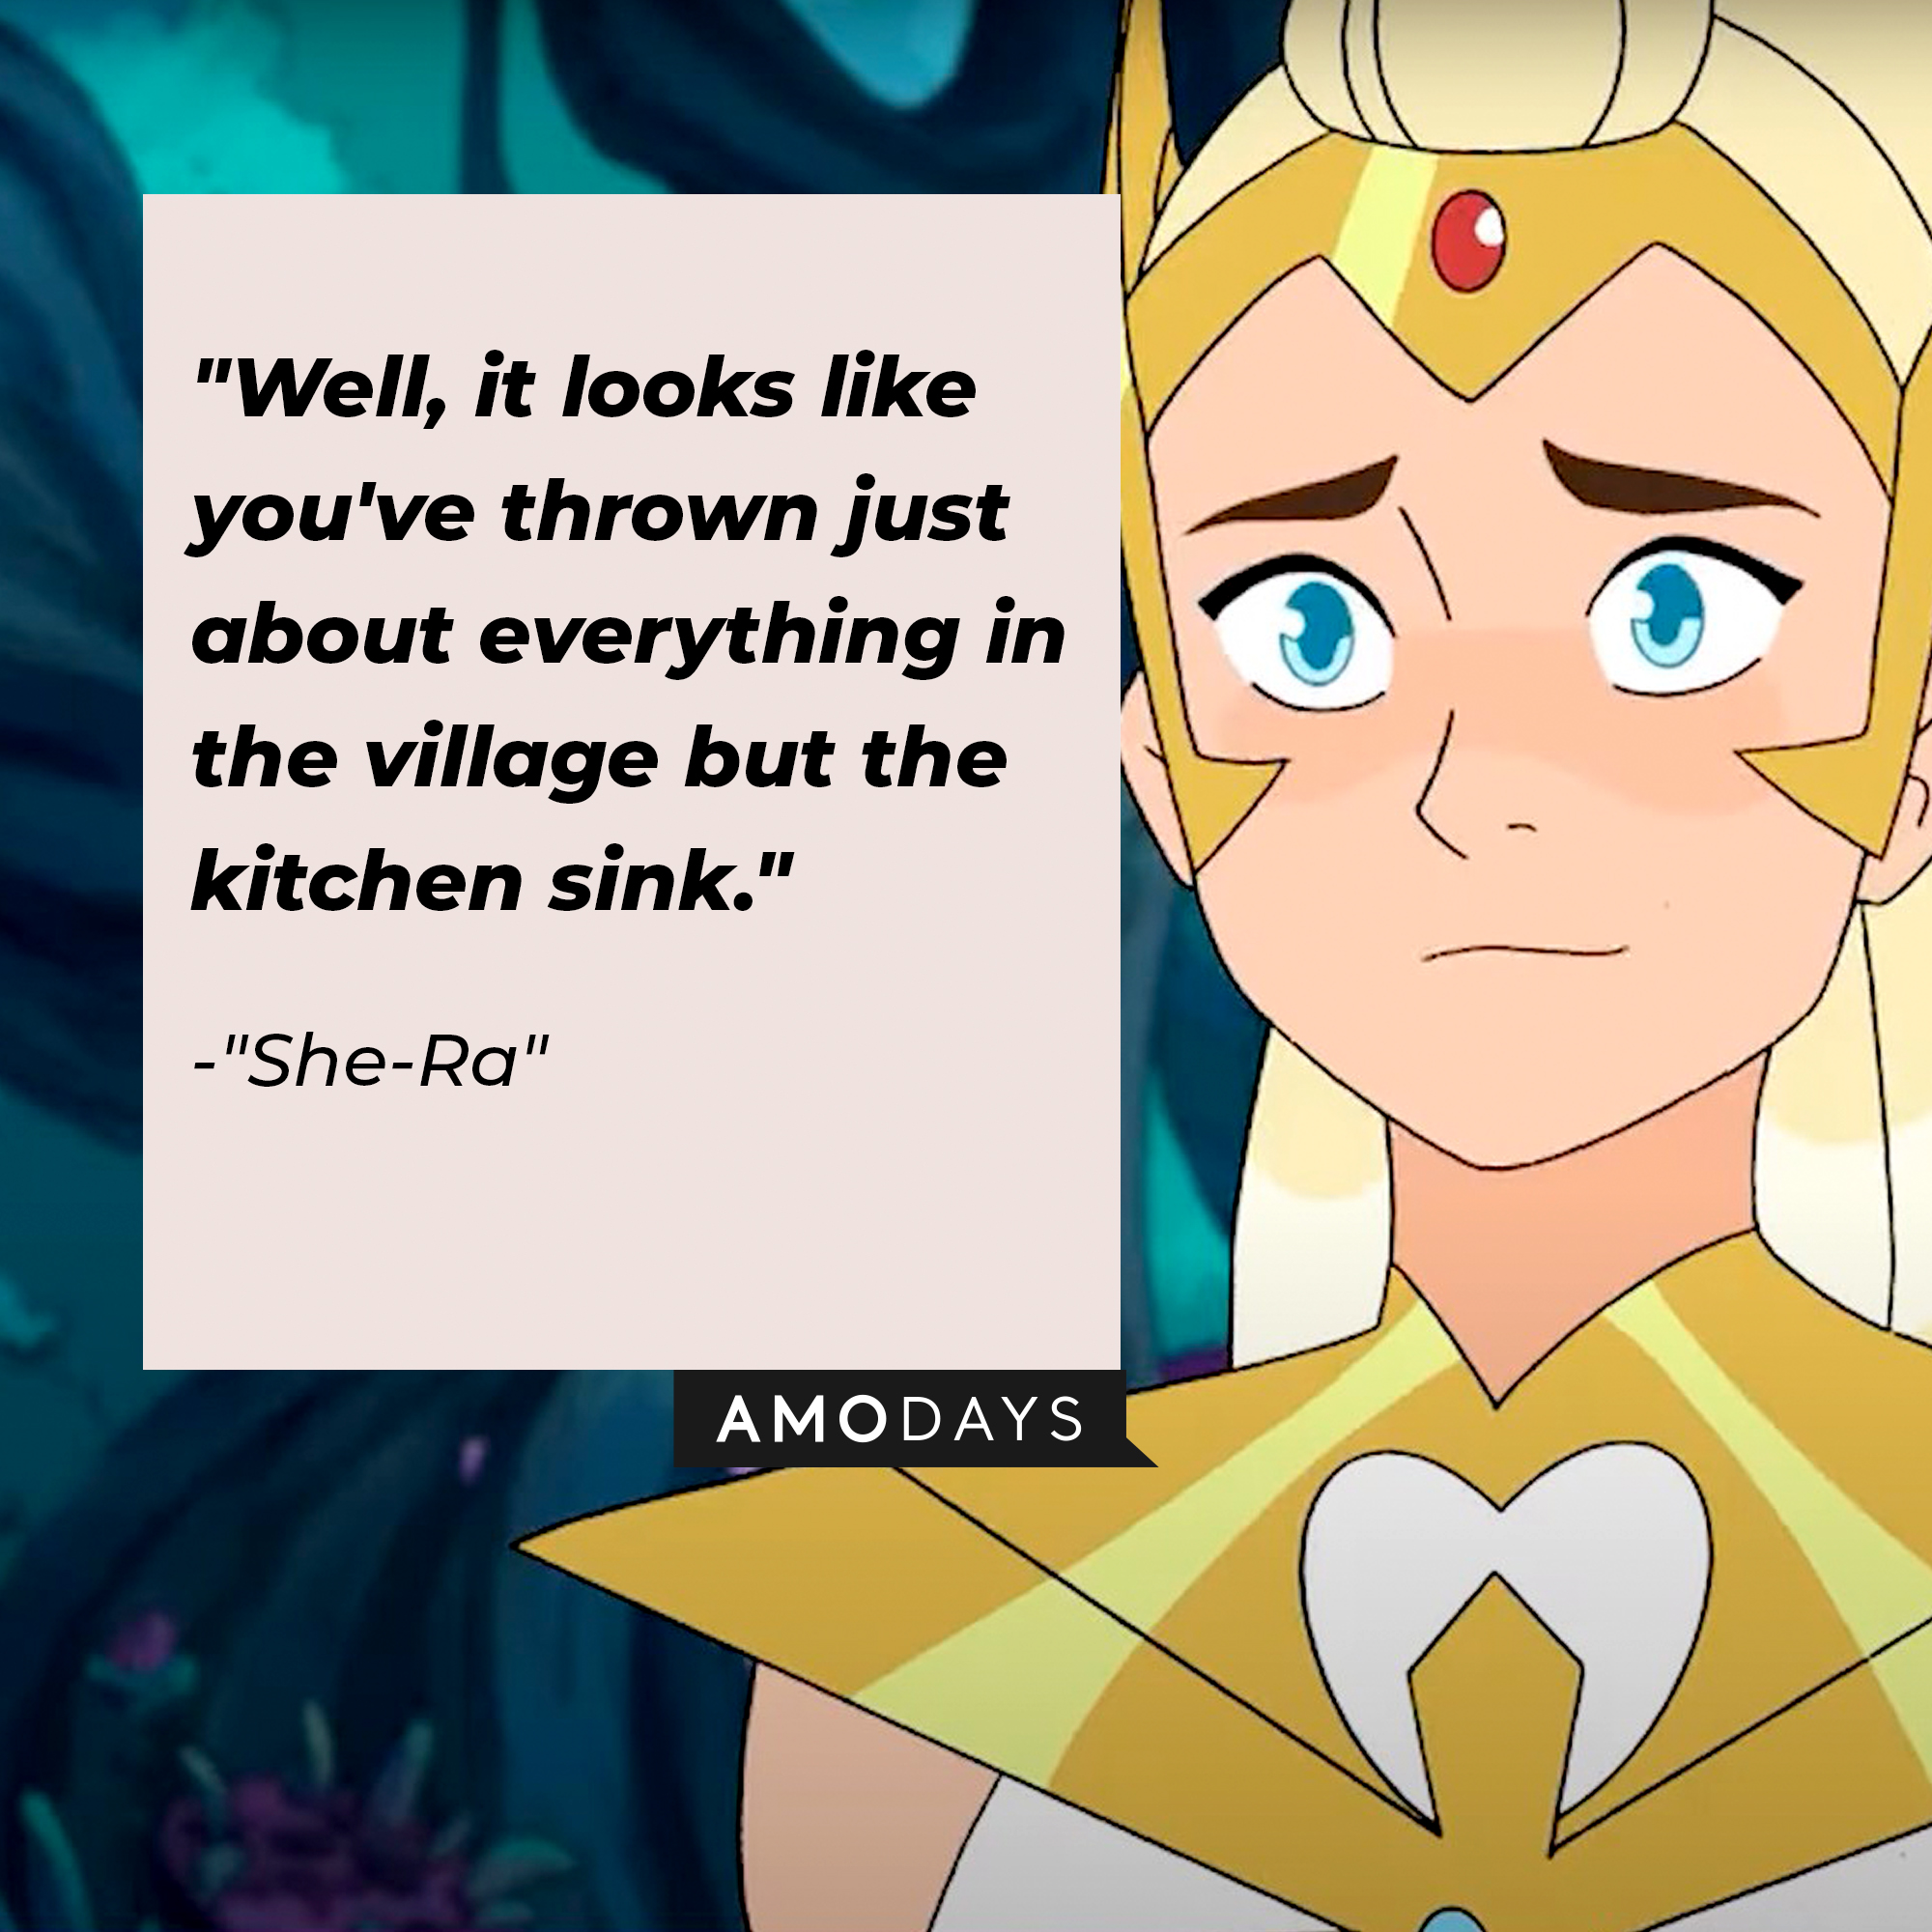 "She-Ra's" quote: "Well, it looks like you've thrown just about everything in the village but the kitchen sink." | Source: Facebook.com/DreamWorksSheRa